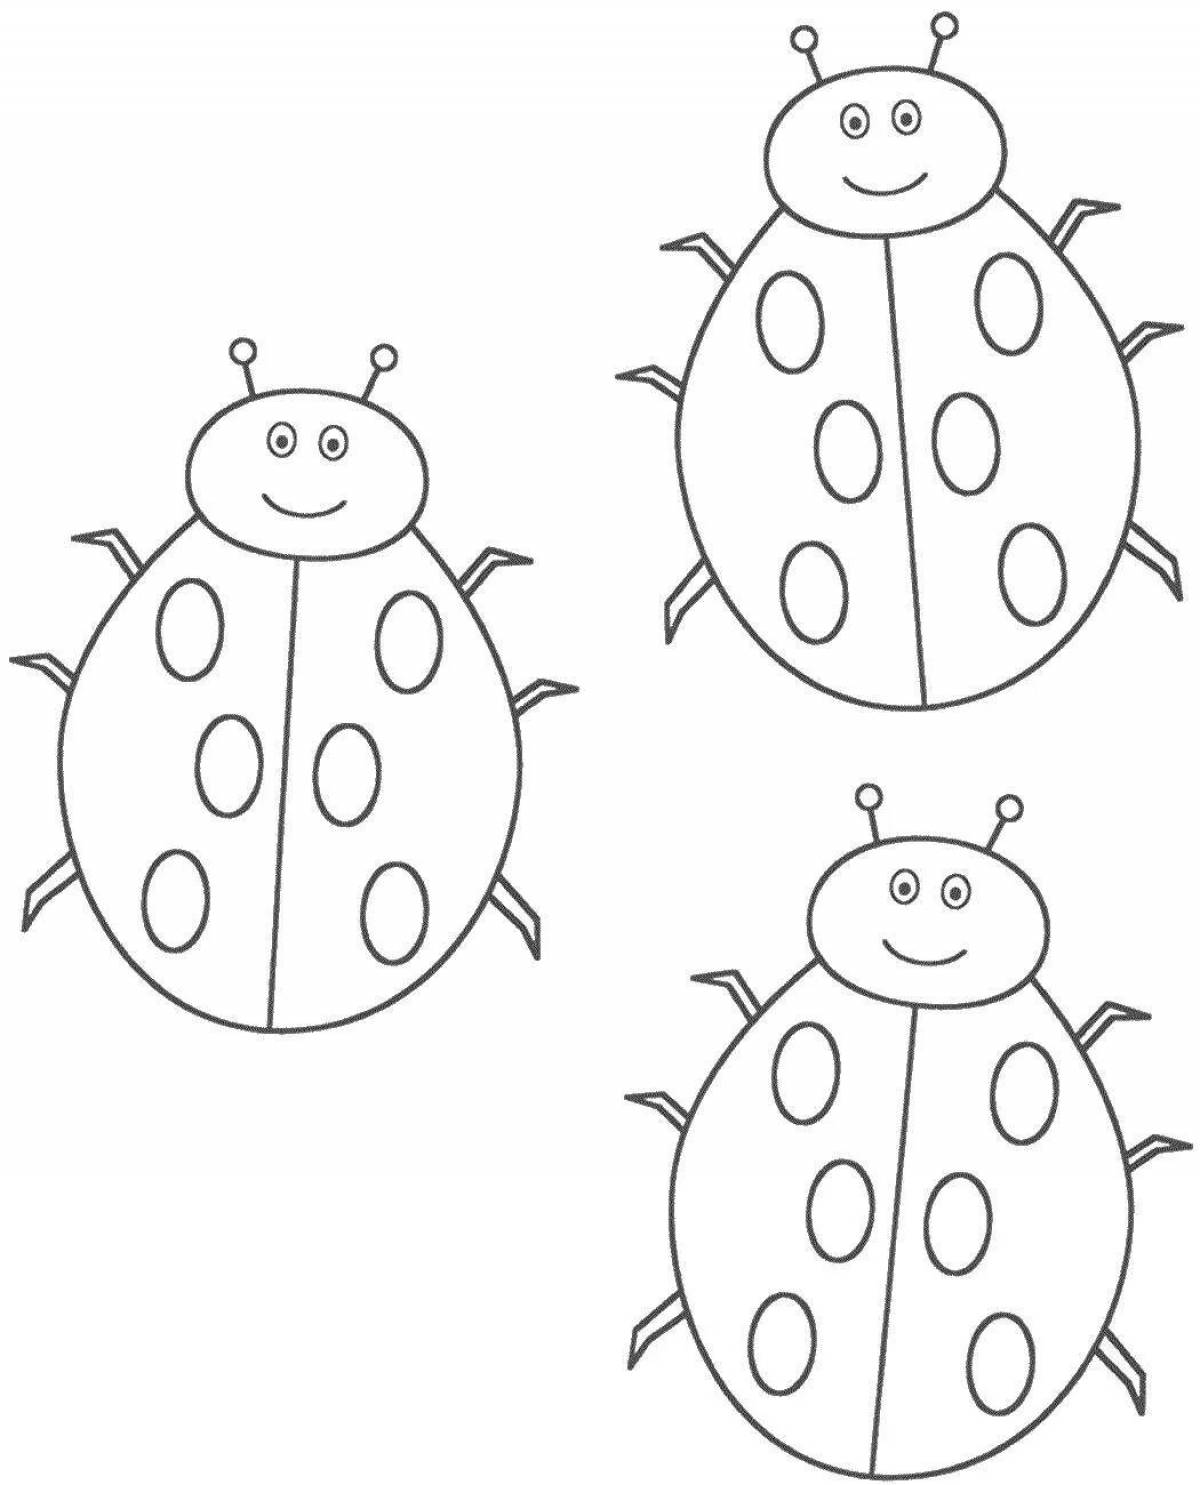 A lovely ladybug coloring book for kids